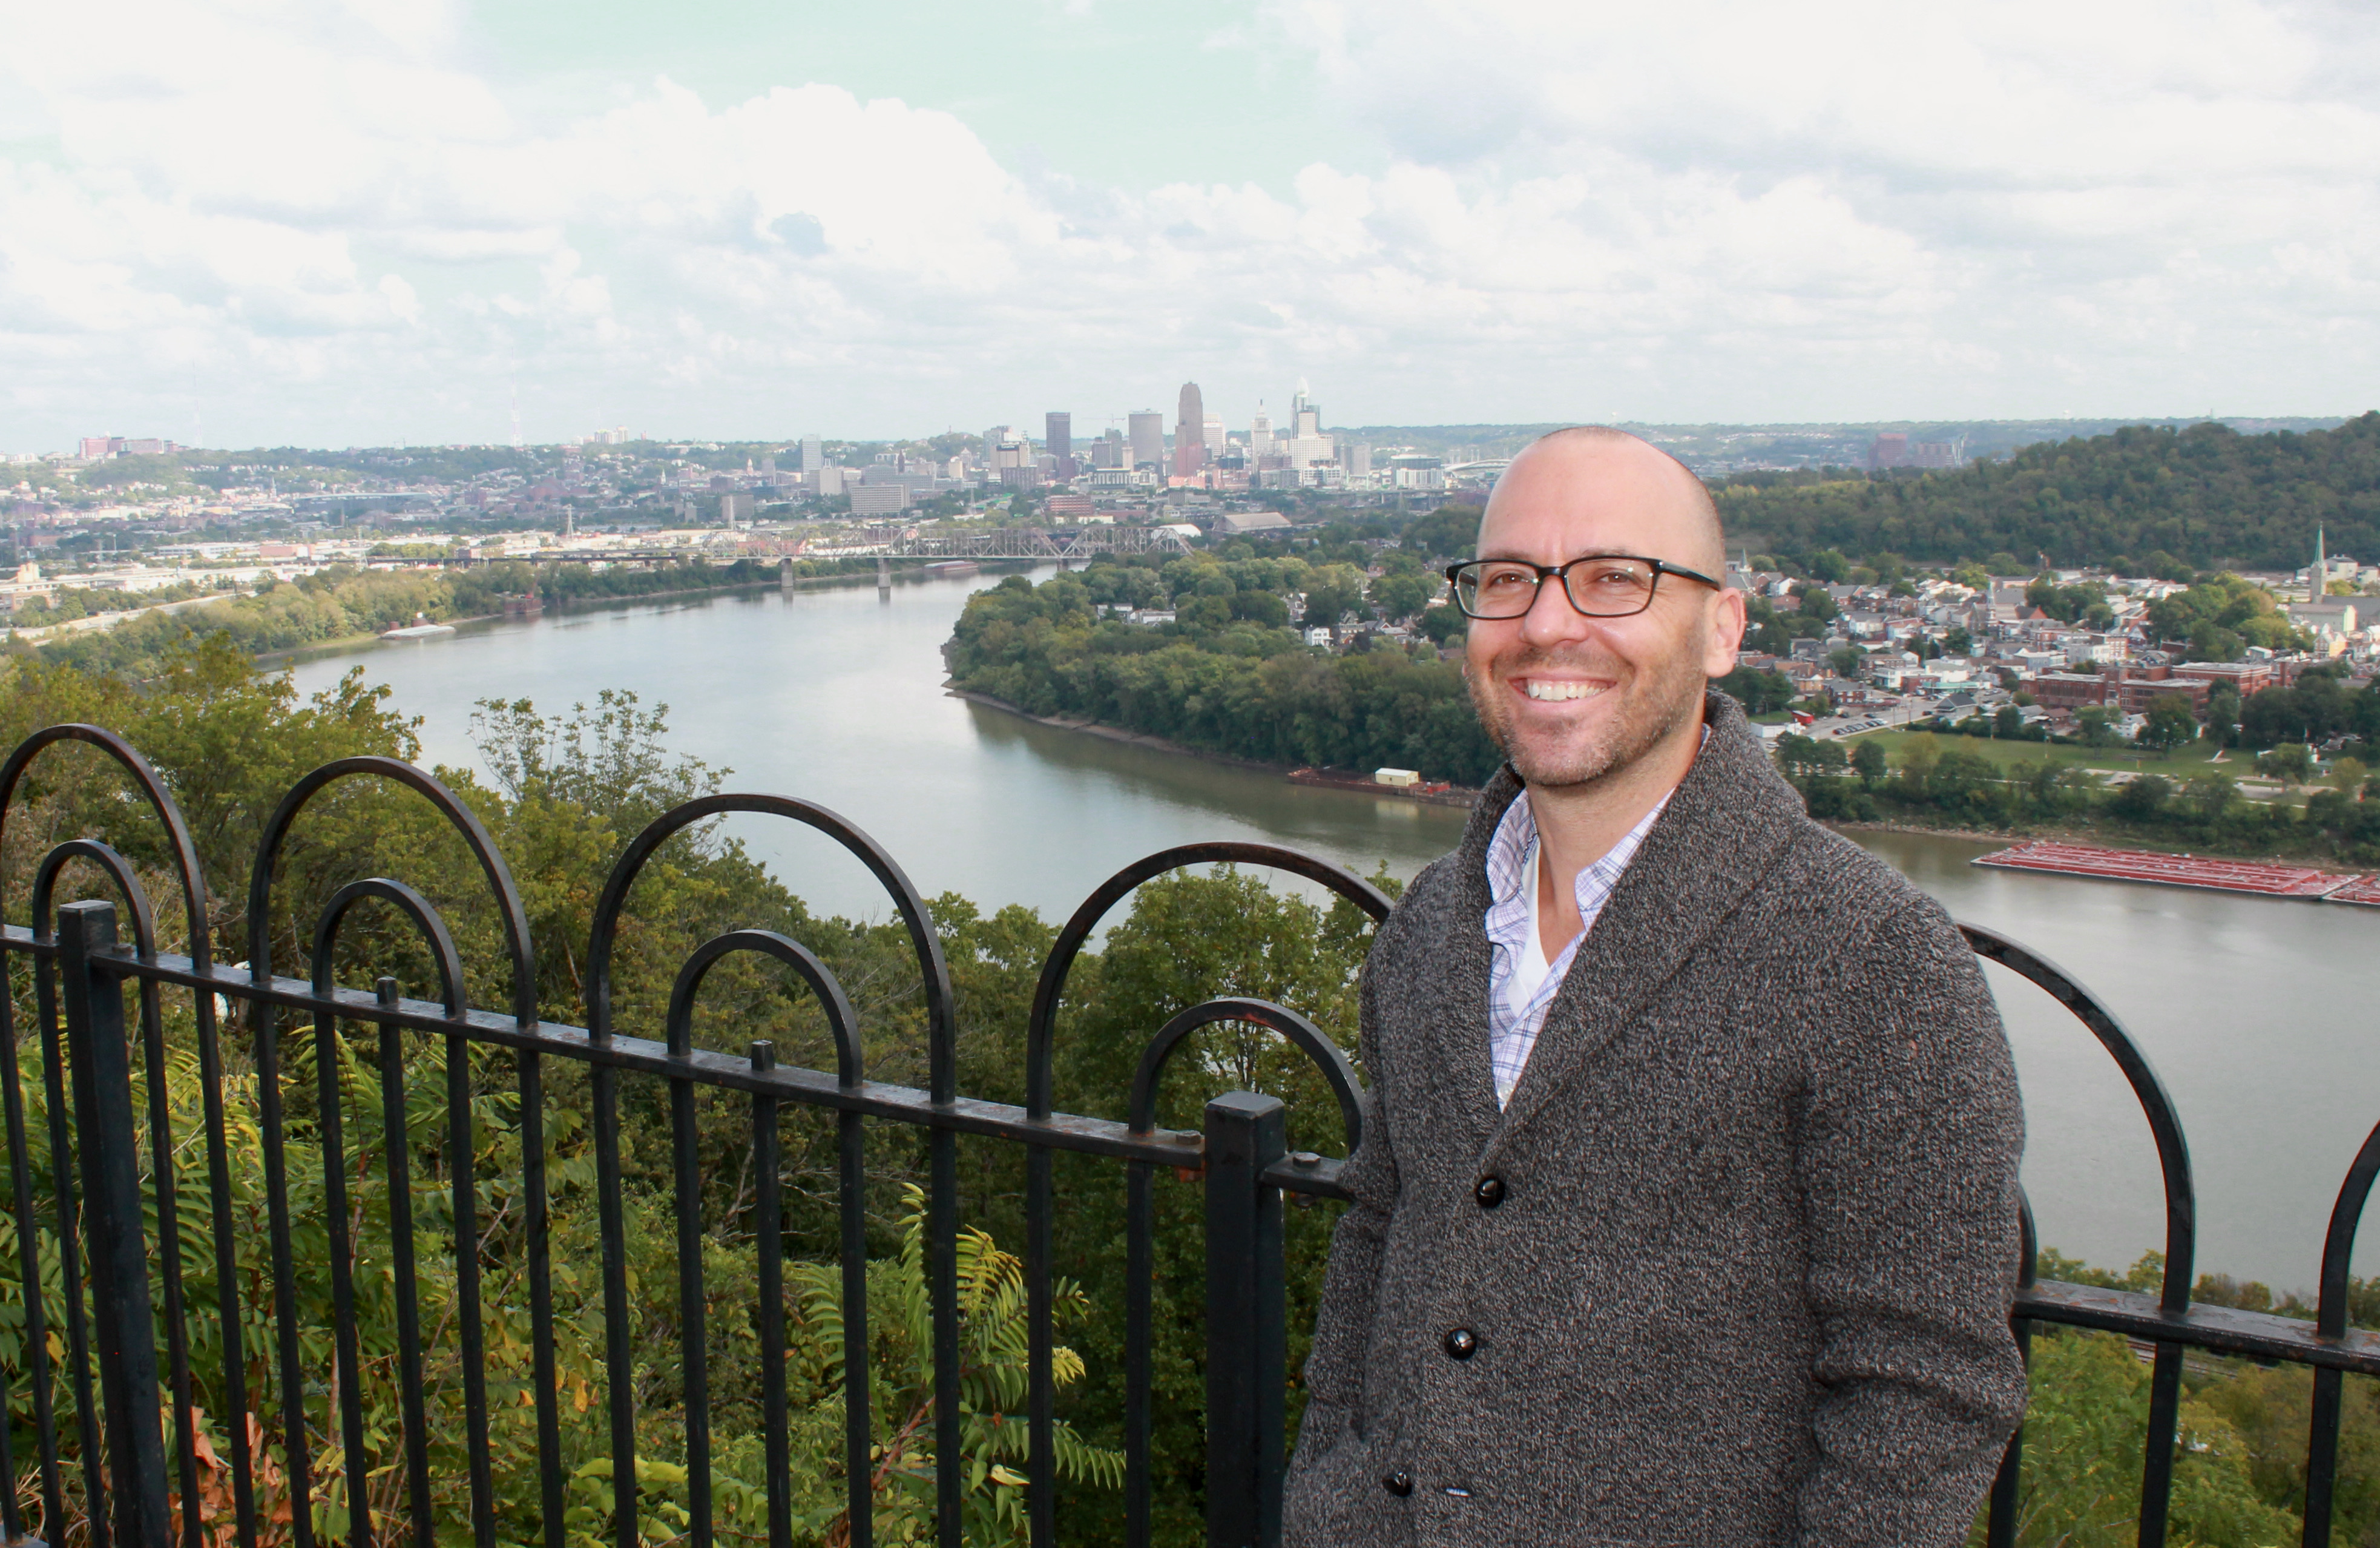 Assistant Professor Patrick Ray will use his Faculty Scholar Award to build a database on information about water quality in the Ohio River. 2021